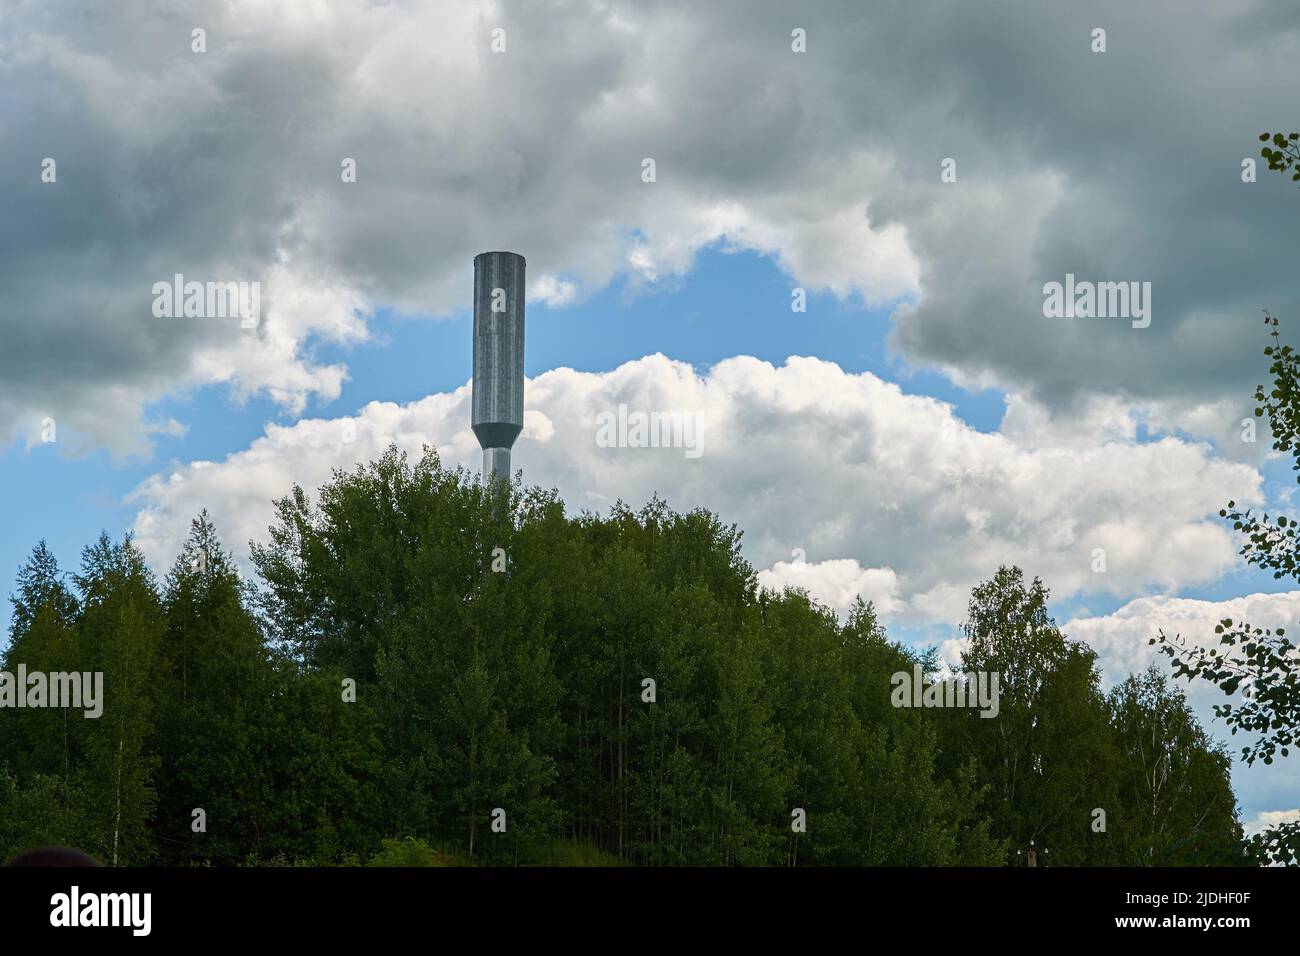 Metal water tower on a background of cloudy sky  Stock Photo